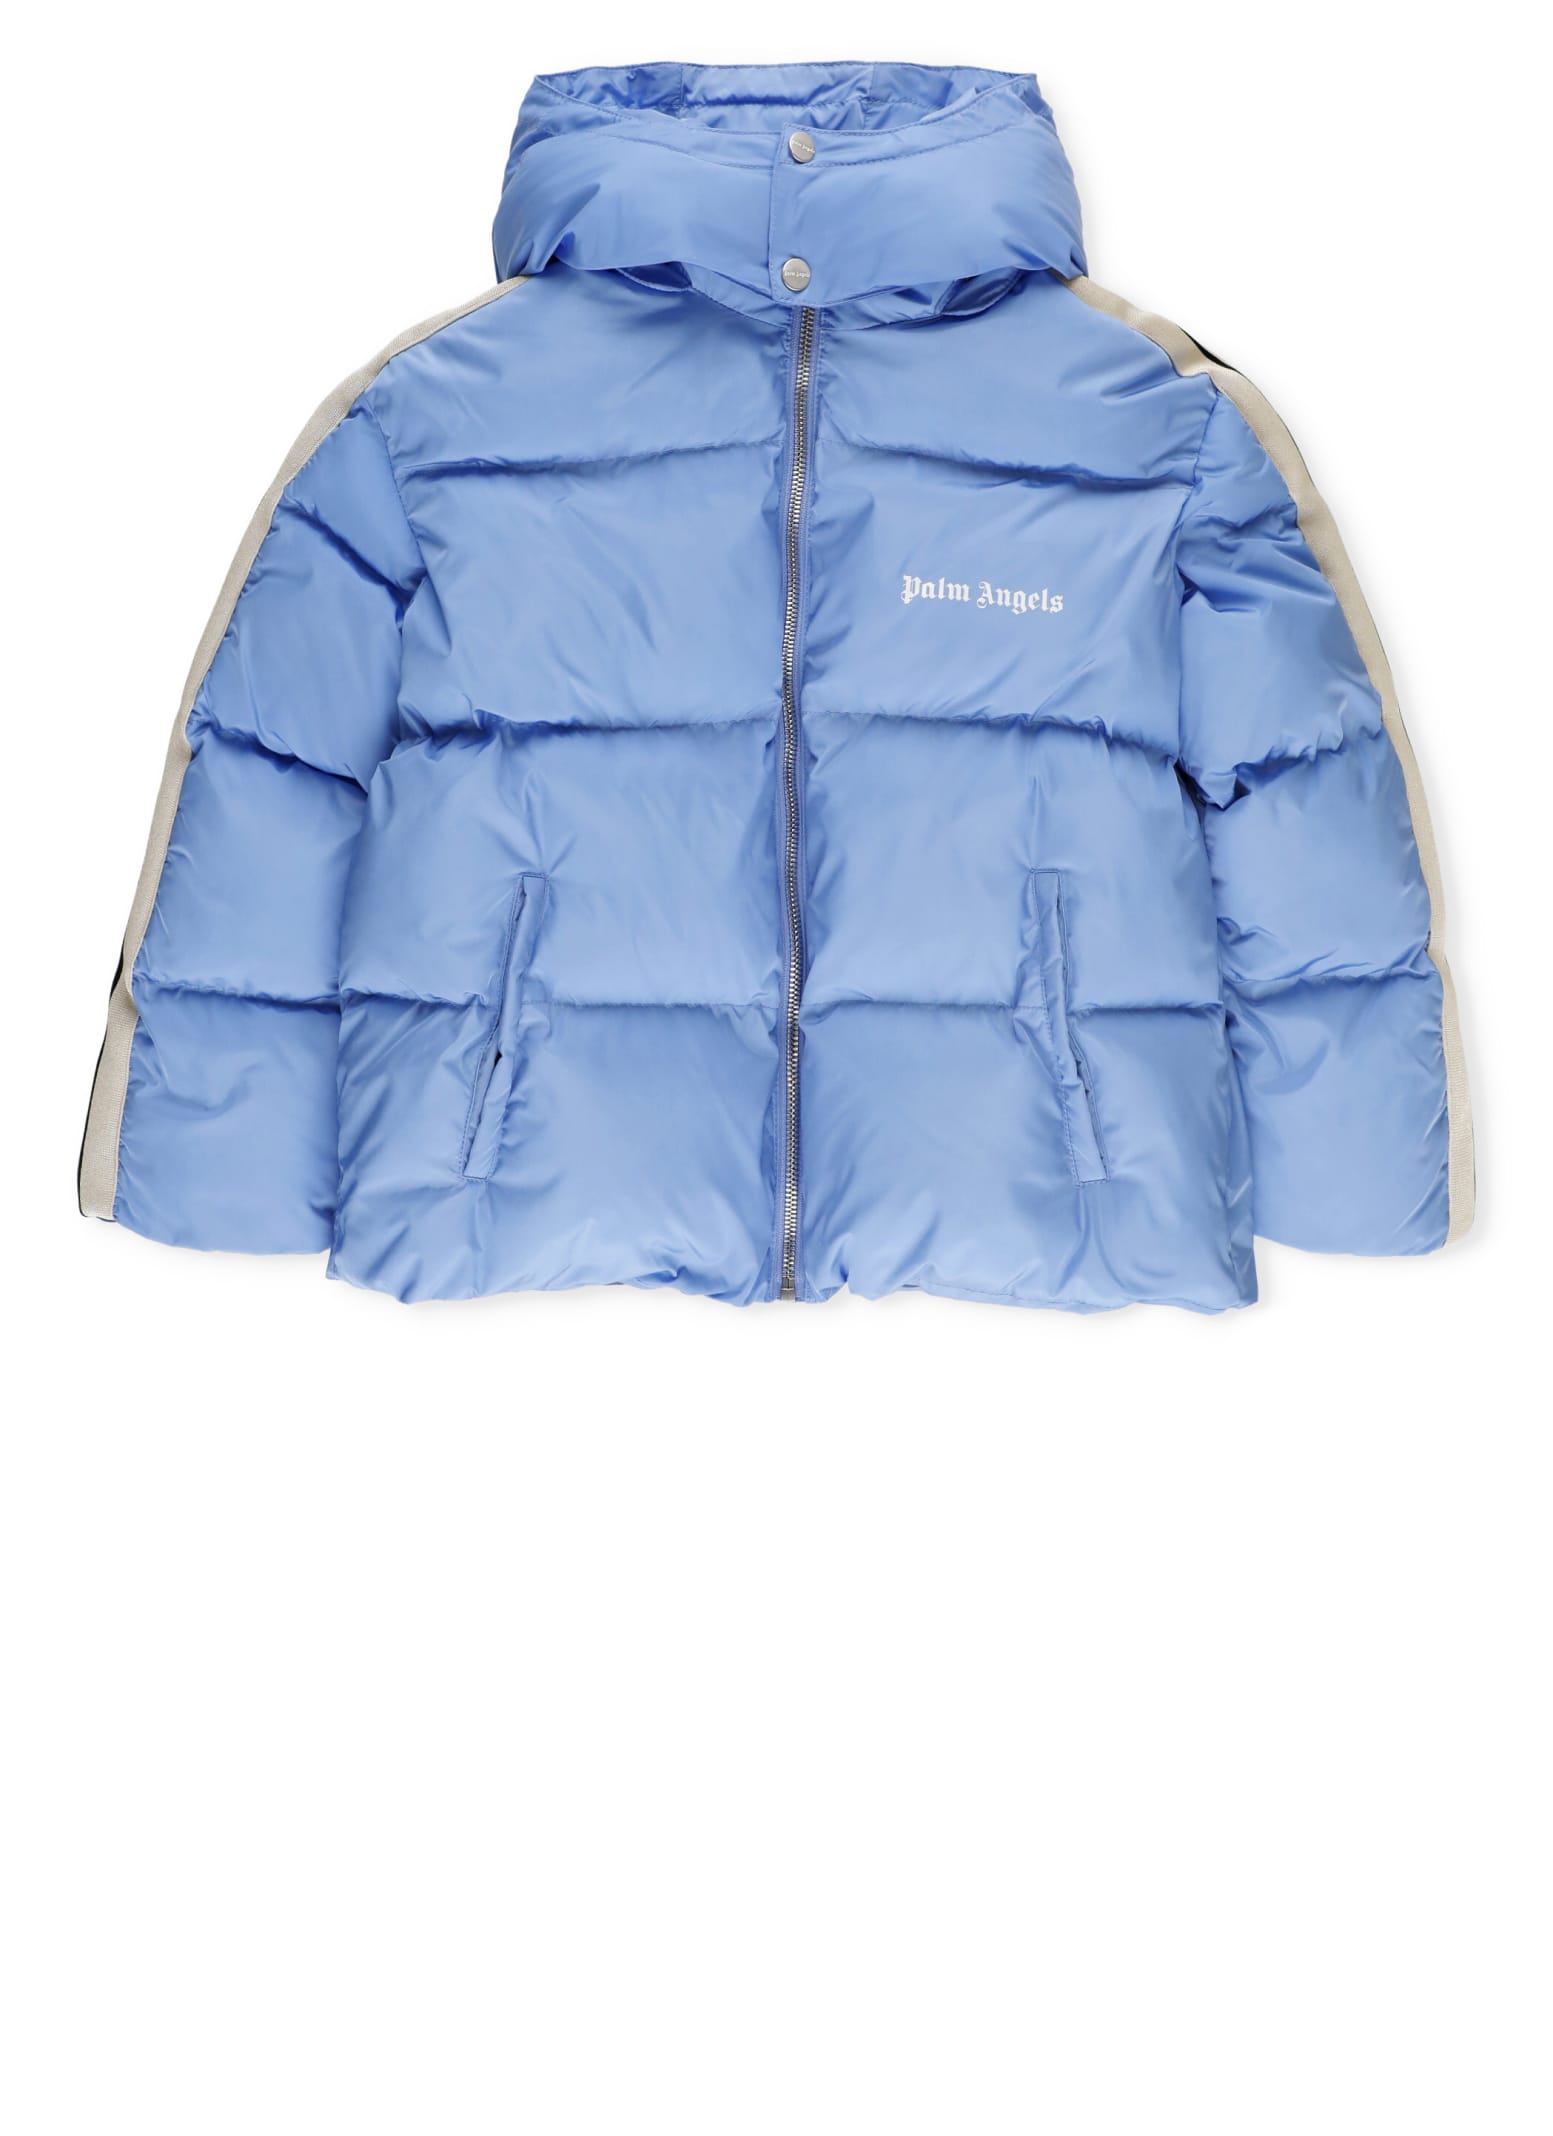 PALM ANGELS PADDED JACKET WITH TRACK LOGO